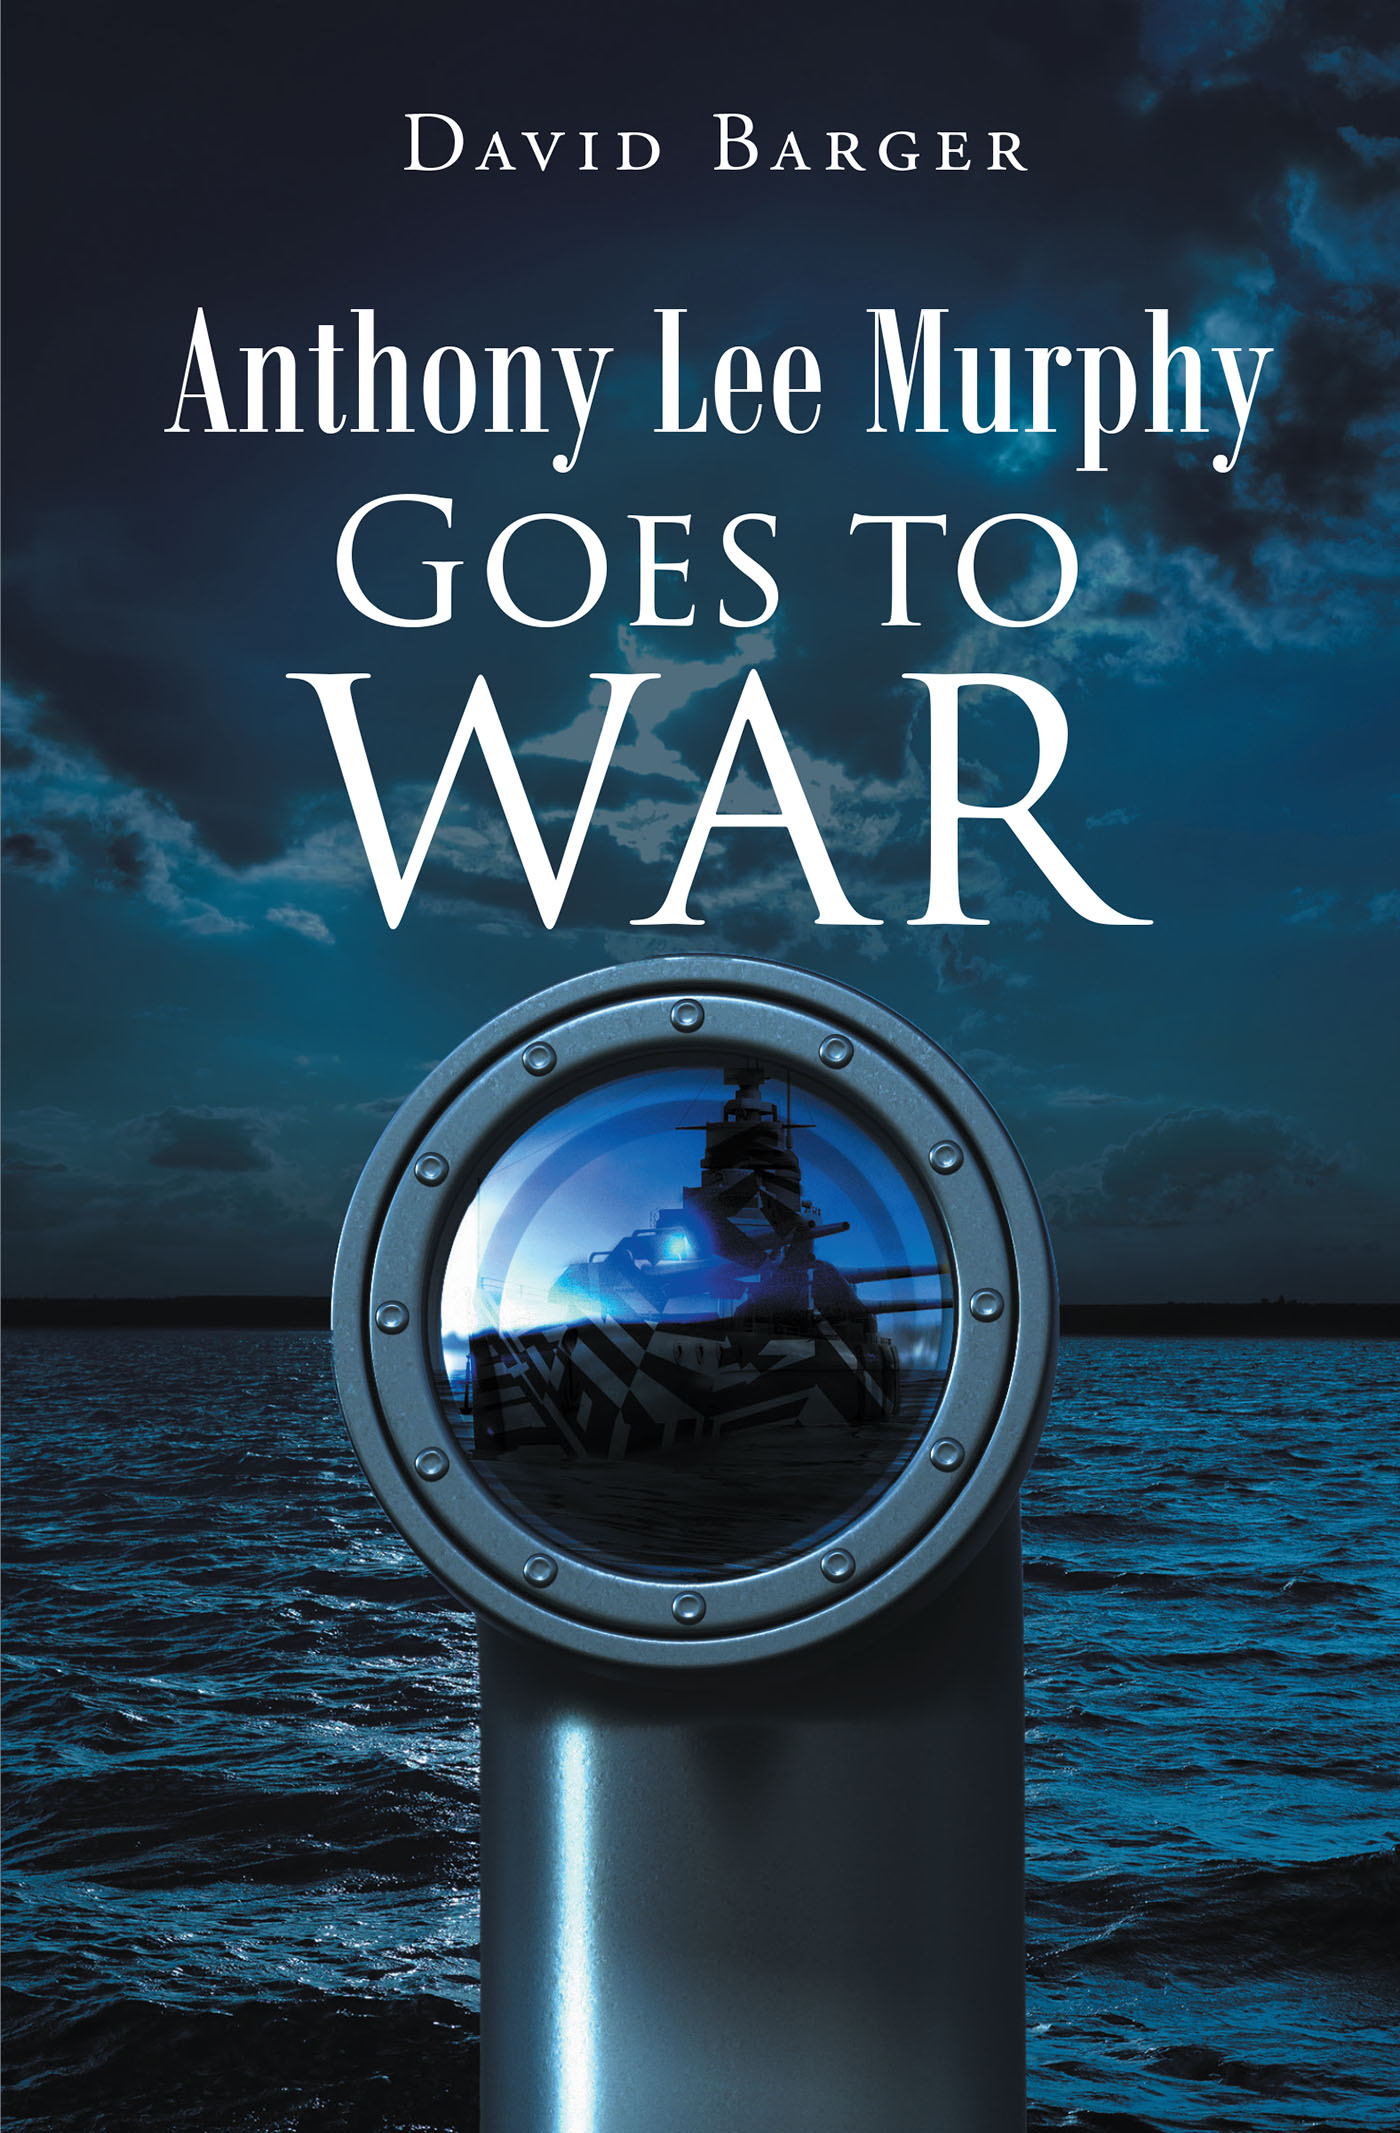 Author David Barger’s New Book, "Anthony Lee Murphy Goes to War," is the Gripping Tale of a Young Soldier’s Journey to Manhood During World War I